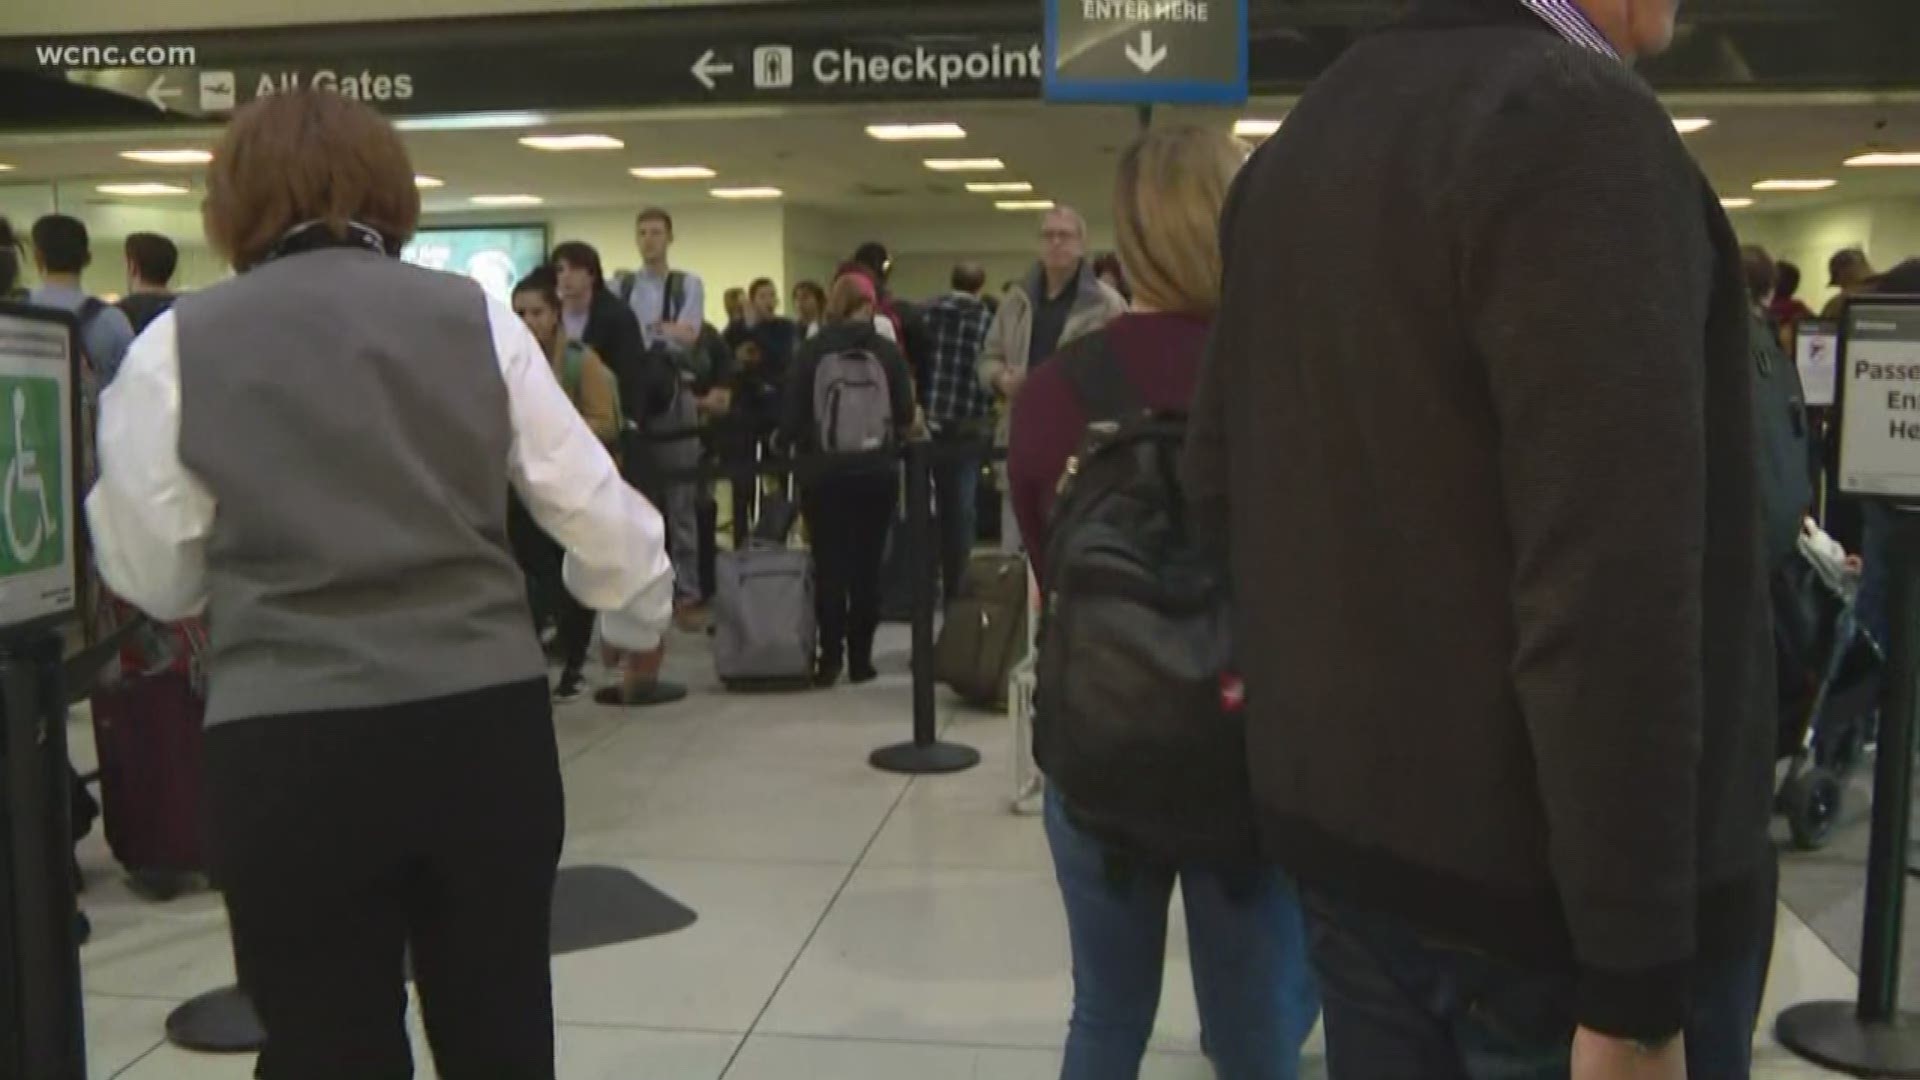 Flights all across the country have been delayed, including at least 20 at Charlotte Douglas International Airport.